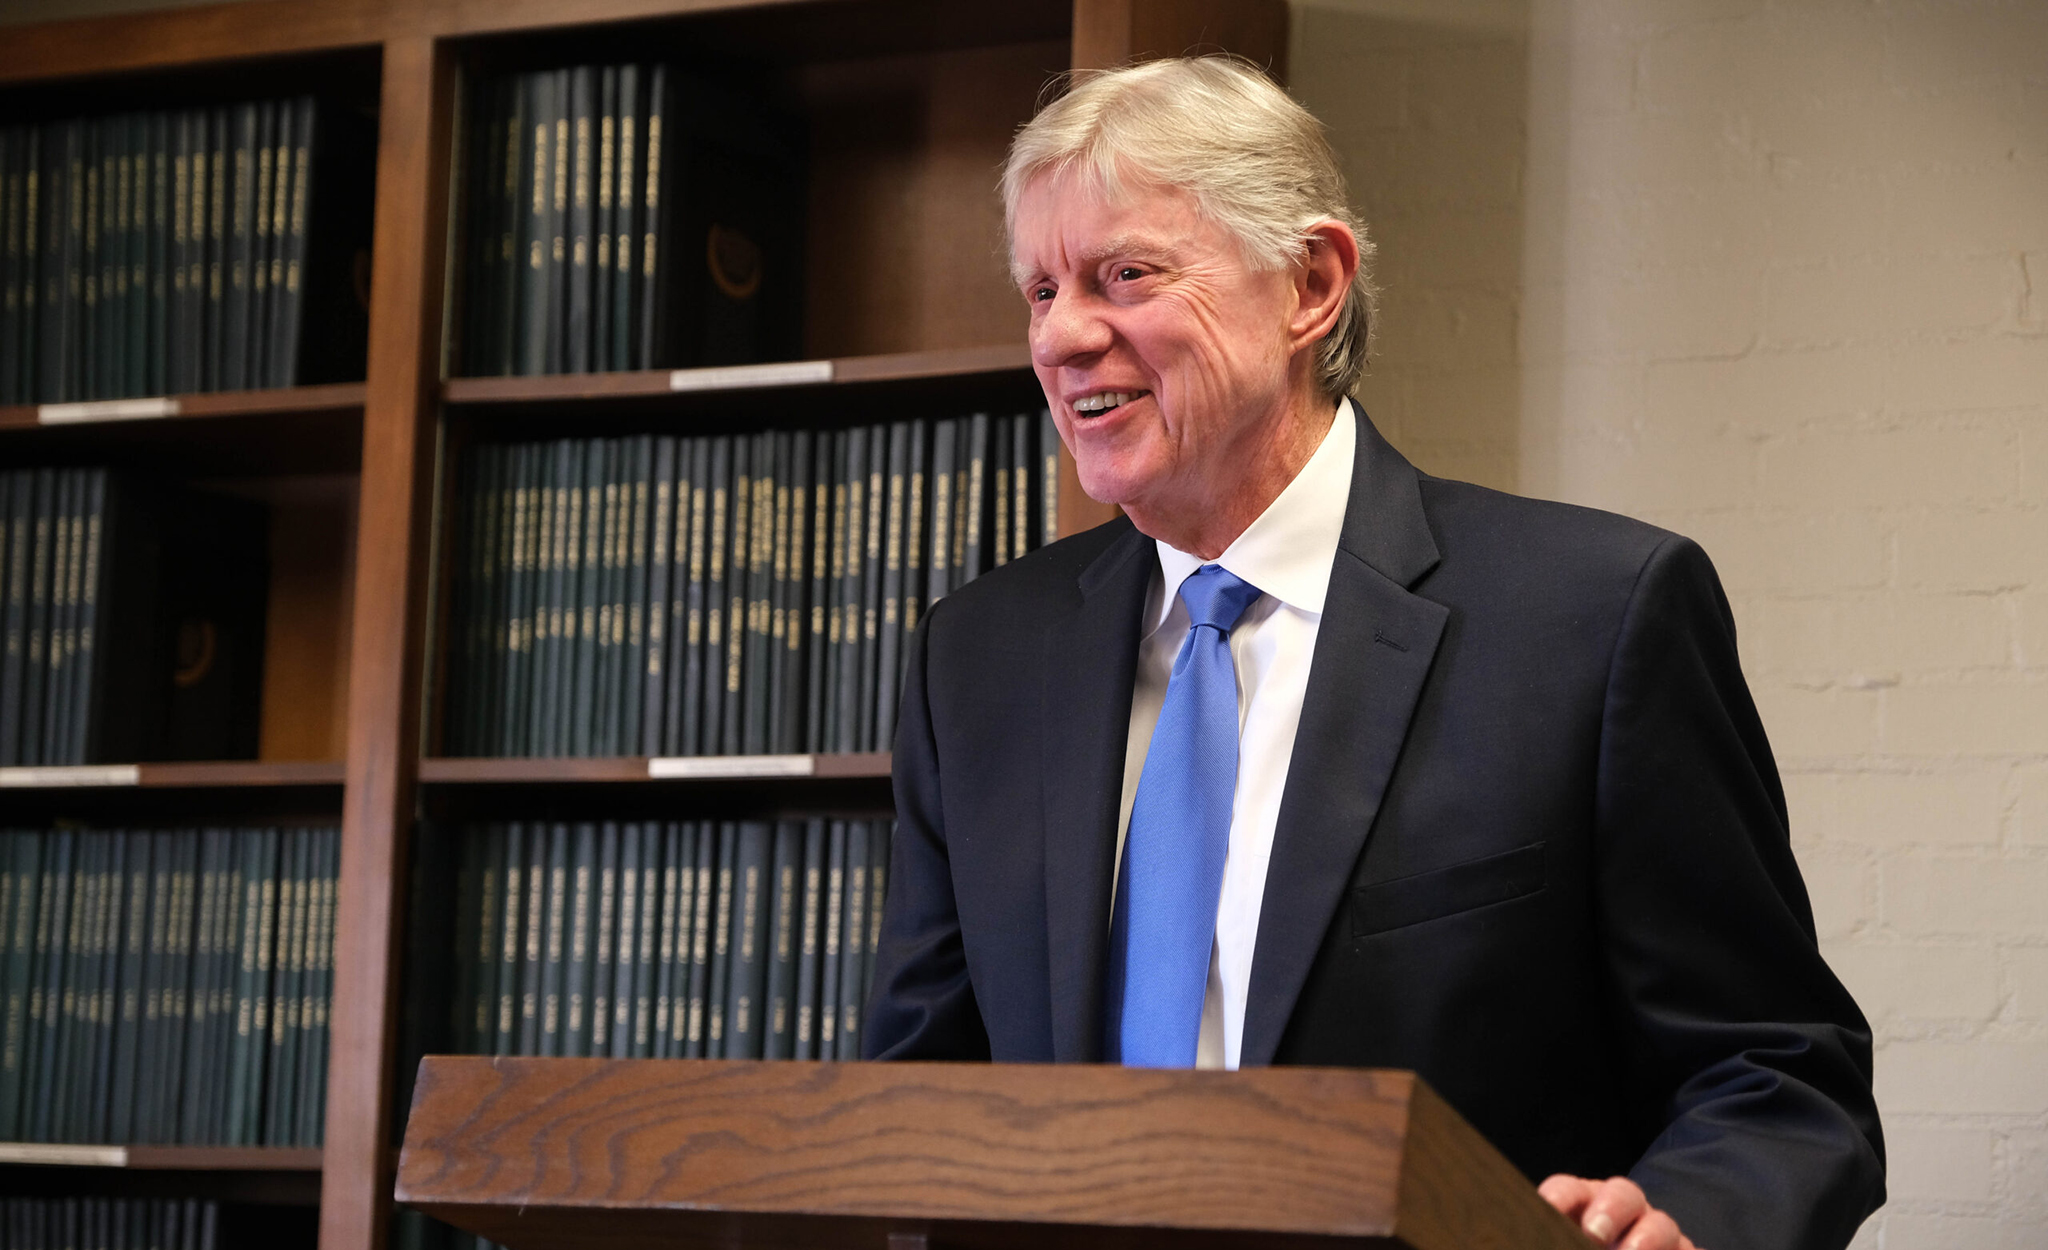 John Winkle, who was instrumental in the creation of the university’s Sally McDonnell Barksdale Honors College, speaks at the recent dedication of the John Winkle Reading and Research Room at the college. Photo by HG Biggs/Honors College